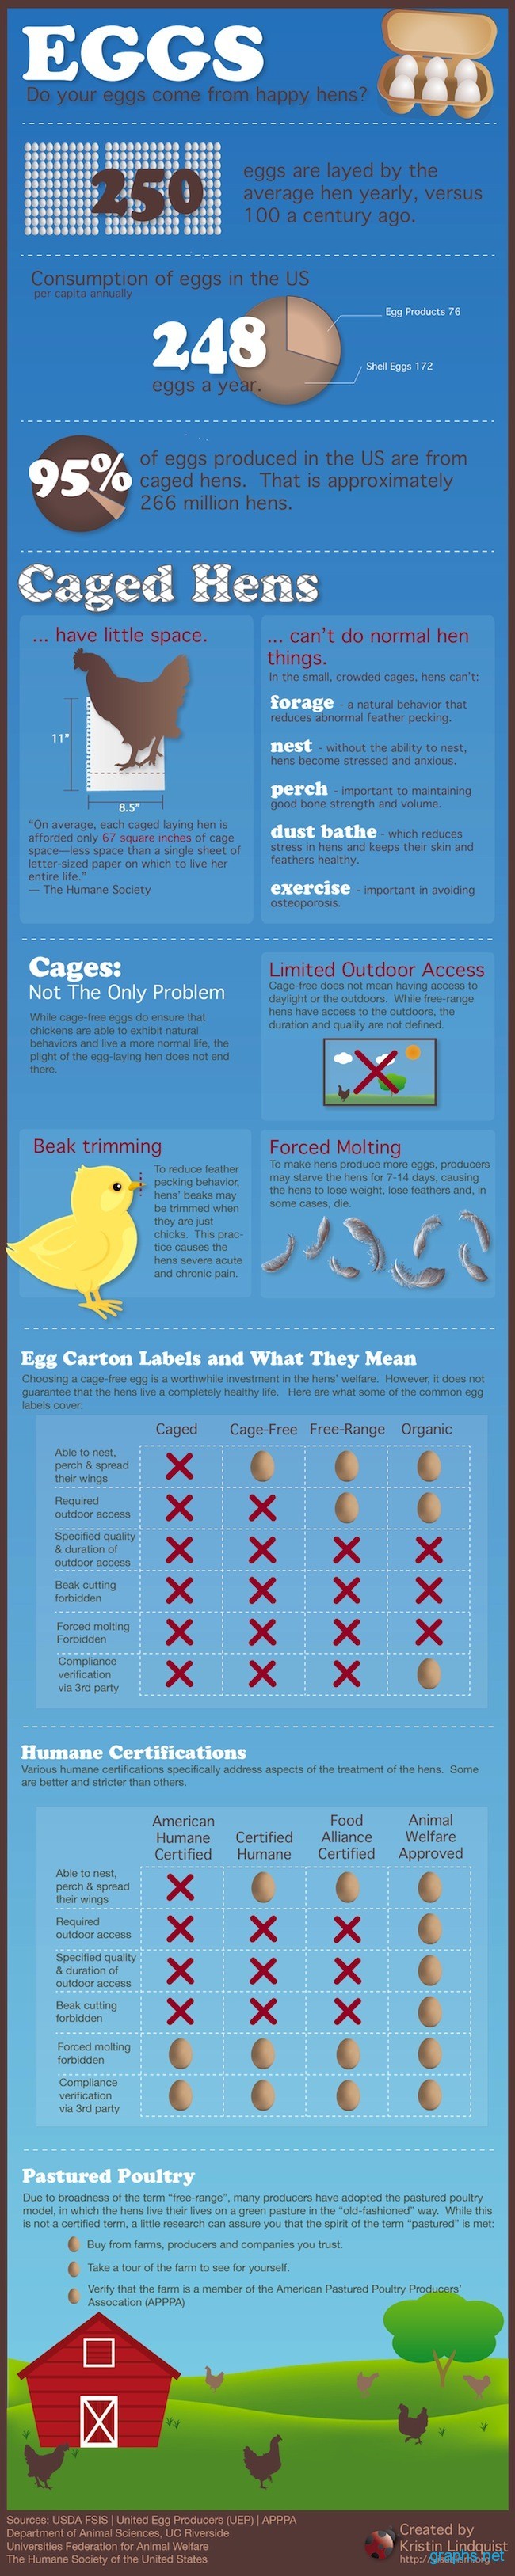 Where do Hen Eggs Come From?